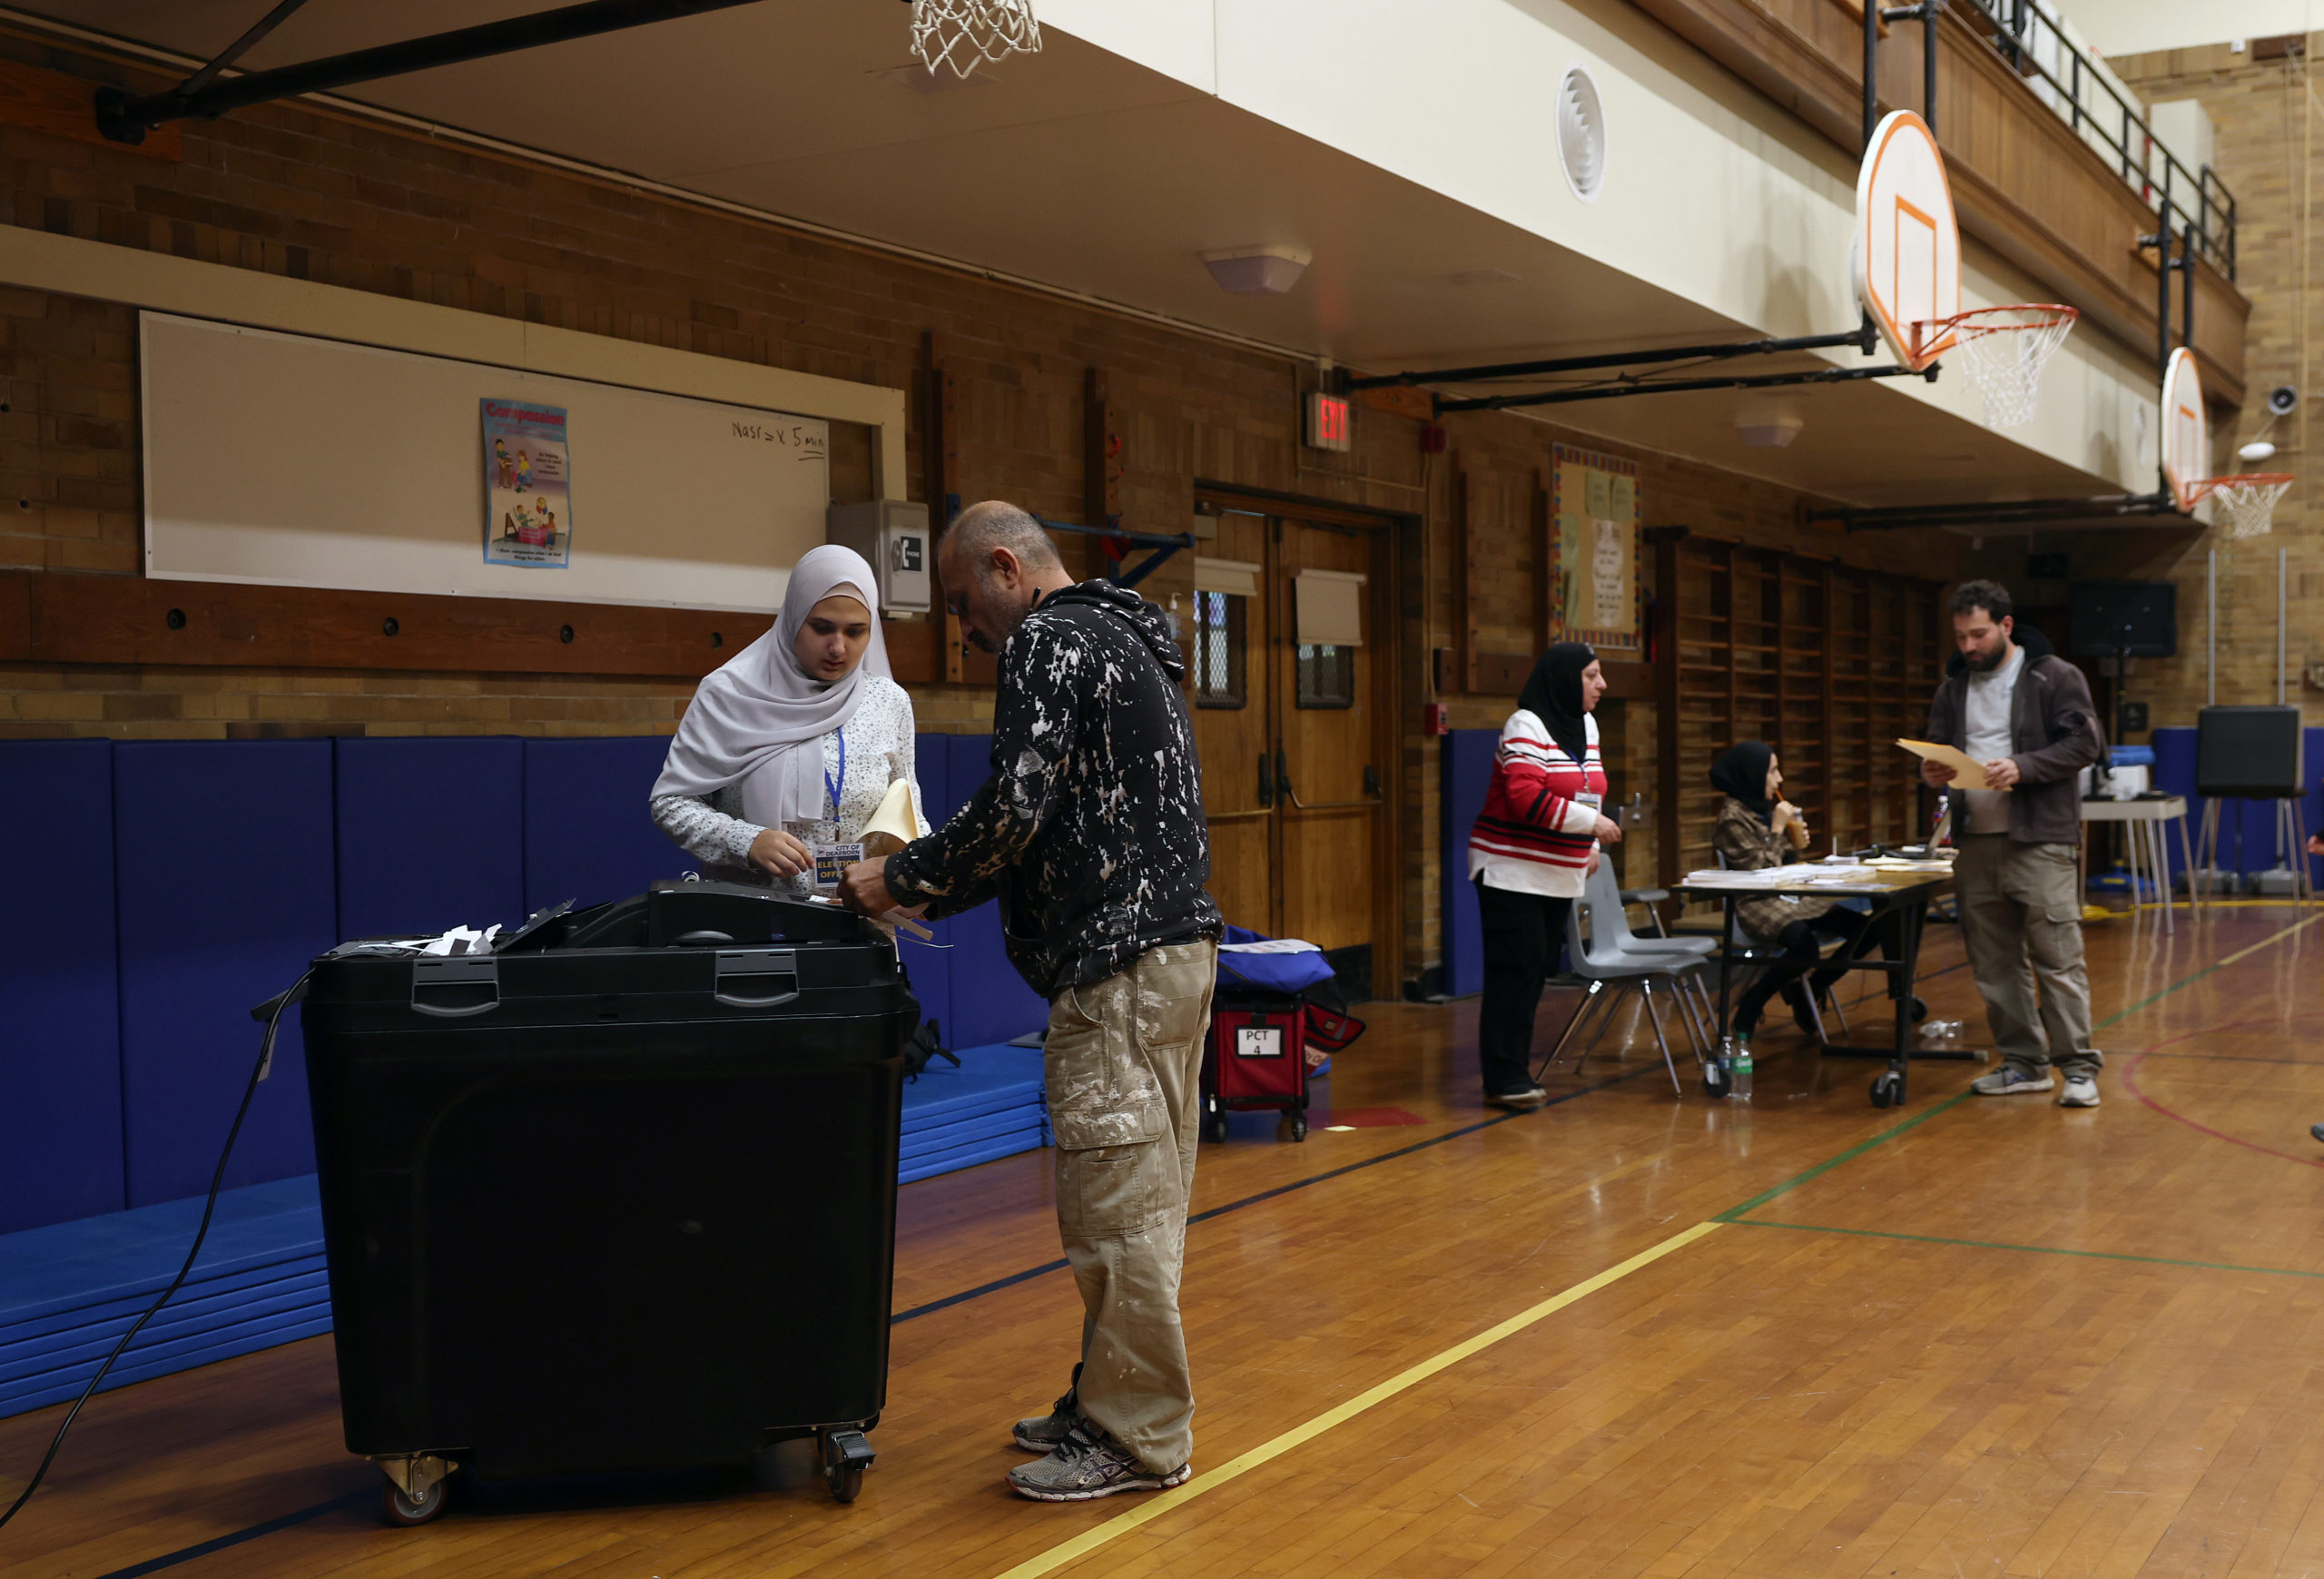 A voter casts their ballot in the Michigan primary election at Oakman Elementary School on February 27, 2024 in Dearborn, Michigan. The Michigan Democratic and Republican parties held their primary elections today. Republican presidential candidate, former U.N. ambassador Nikki Haley has vowed to stay in the race at least through Super Tuesday on March 5. (Photo by Kevin Dietsch/Getty Images)